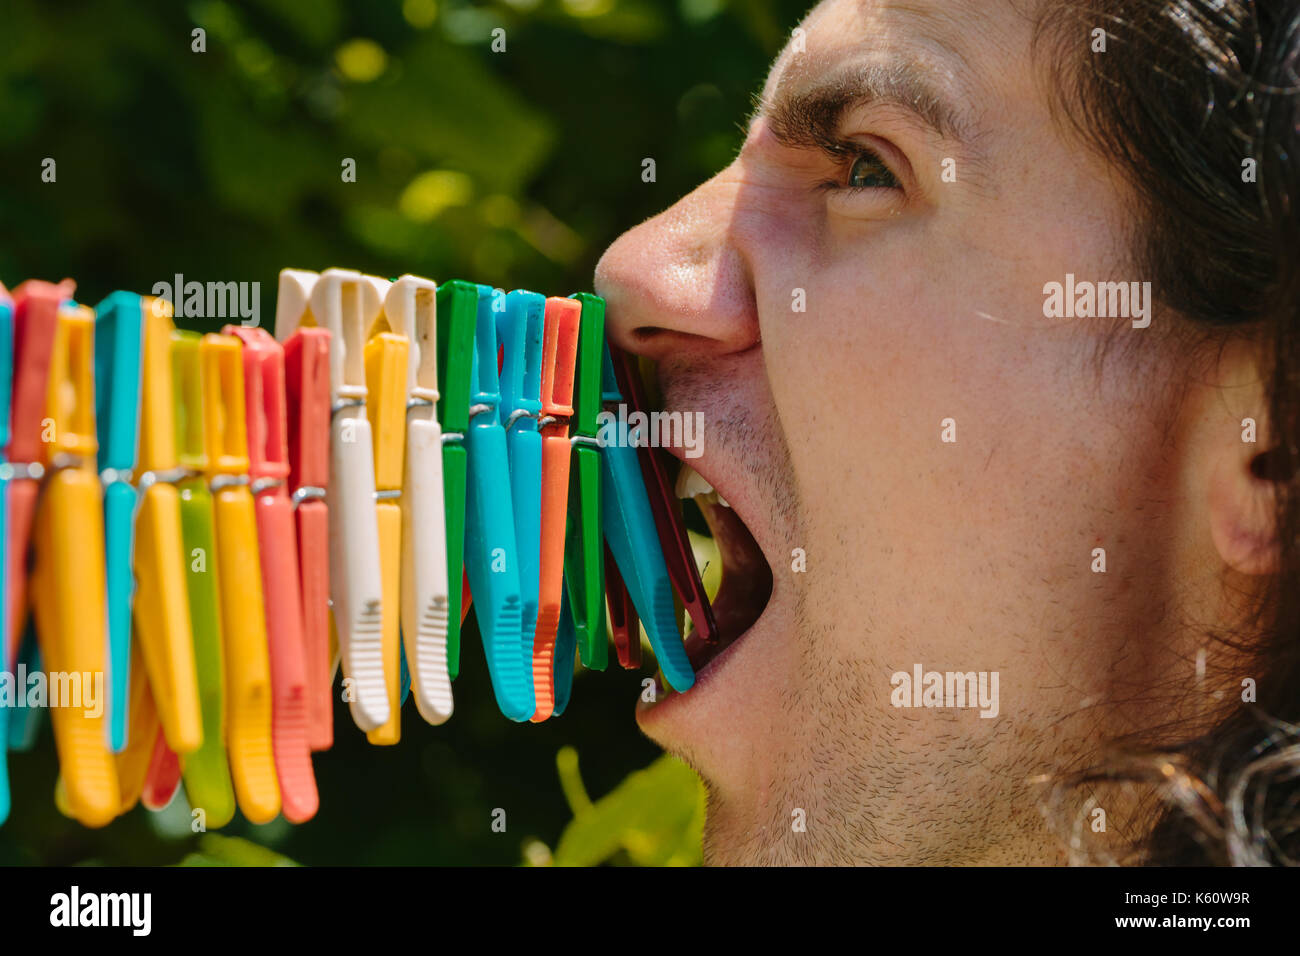 Man tries to bite off clothes pegs. Stock Photo